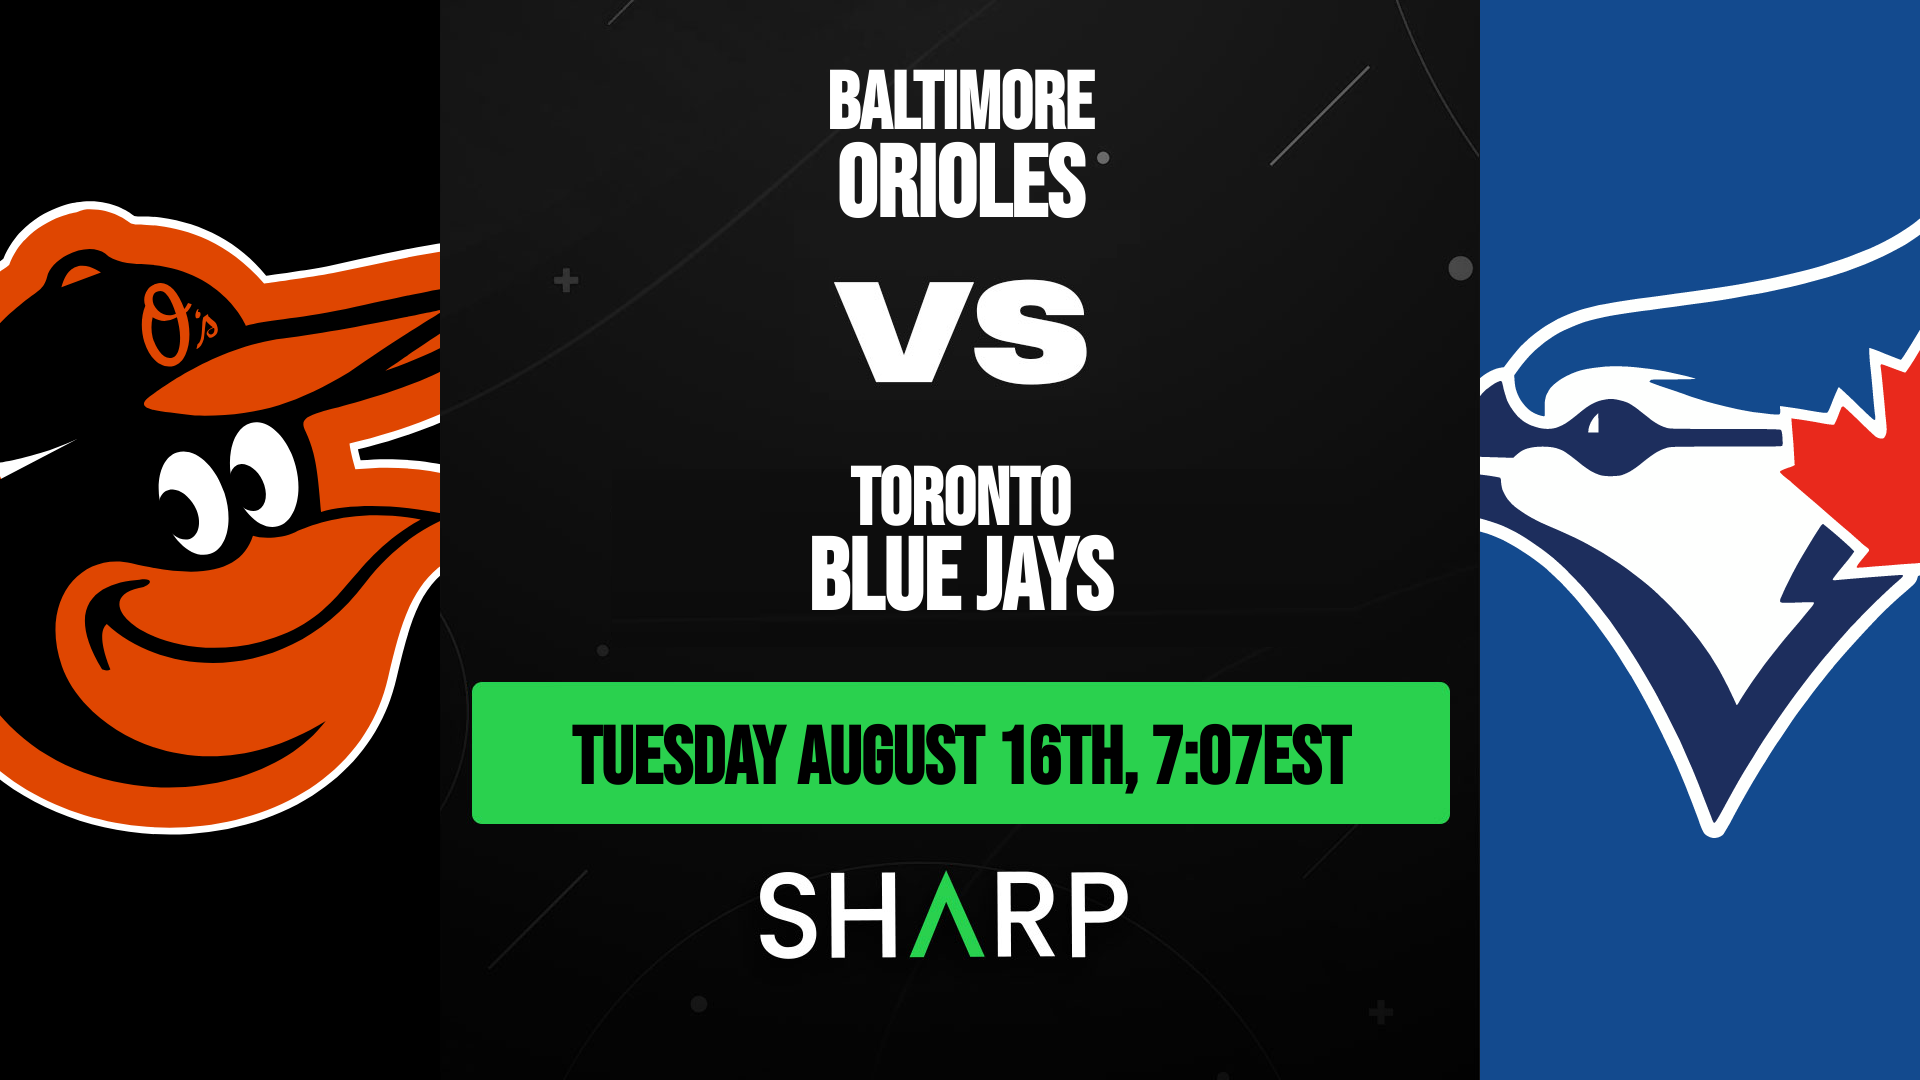 Baltimore Orioles @ Toronto Blue Jays Matchup Preview - August 16th, 2022